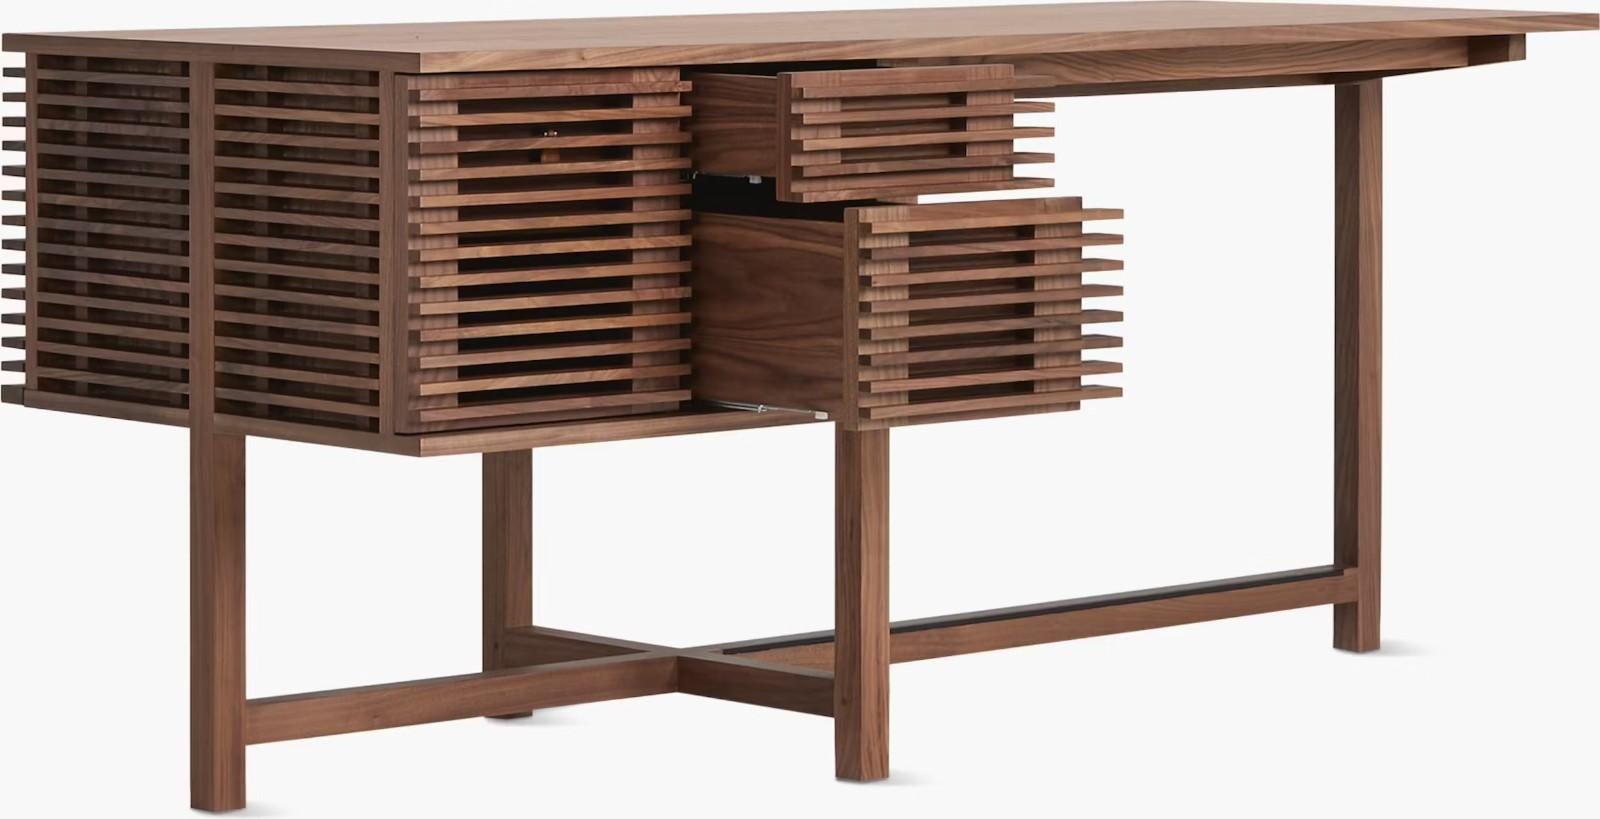 A Nathan Young for Design Within Reach Walnut Line Storage Desk. This is a gorgeous contemporary piece from DWR with mid century modern design inspiration. This piece features a very minimalistic design, with very functional features. This piece